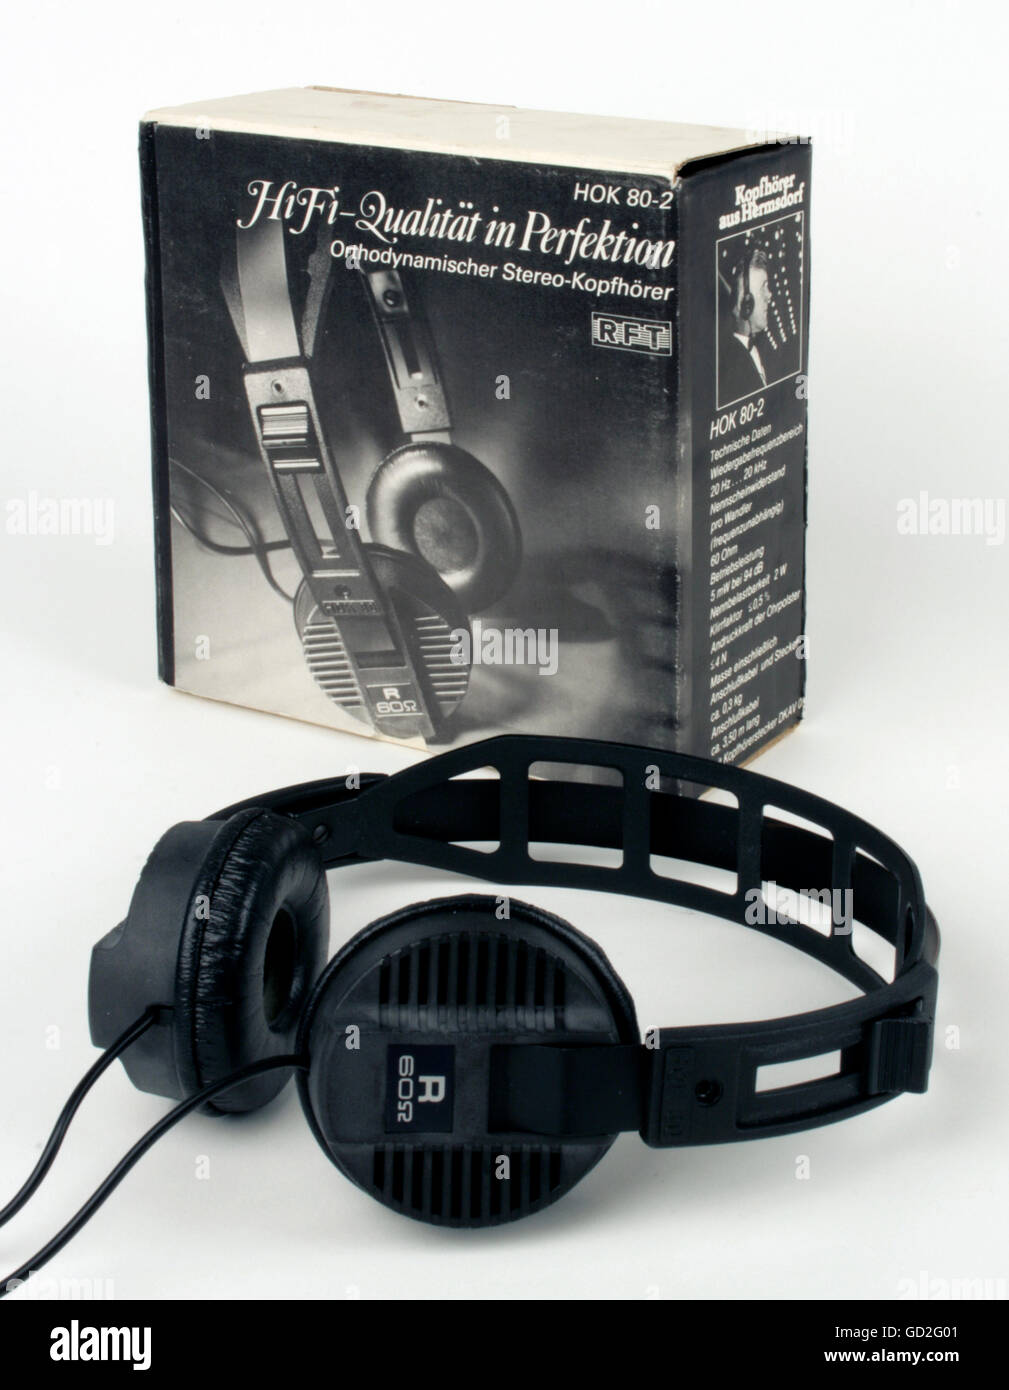 technics, hi-fi, stereo headphones HOK 80-2, design: unknown, design by factory (sale price: 165 mark), made by: Kombinat VEB Keramische Werke Hermsdorf, East-Germany, 1980s, Additional-Rights-Clearences-Not Available Stock Photo